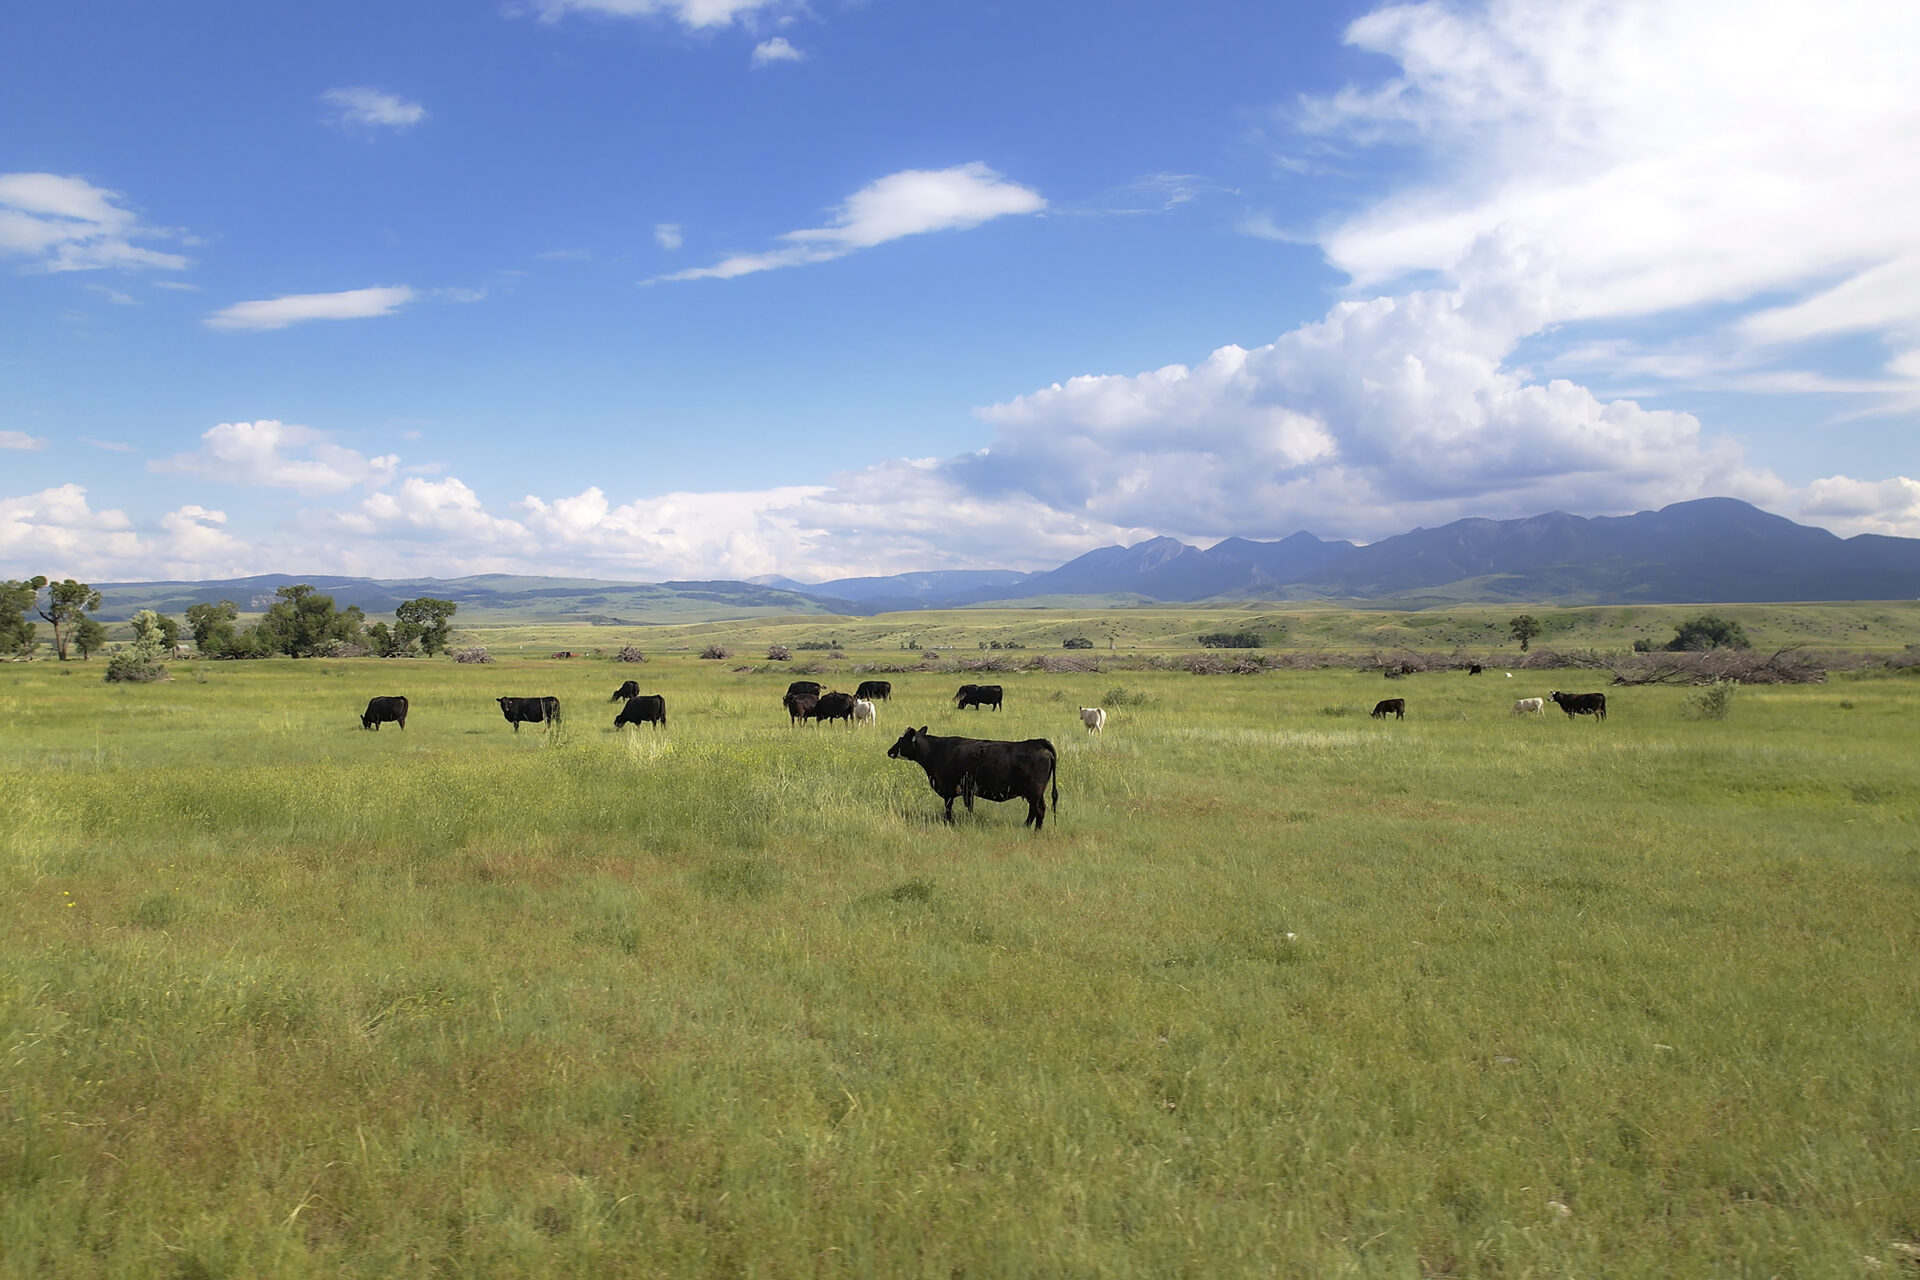 Beef cows grazing in a grassy field in the Montana countryside.